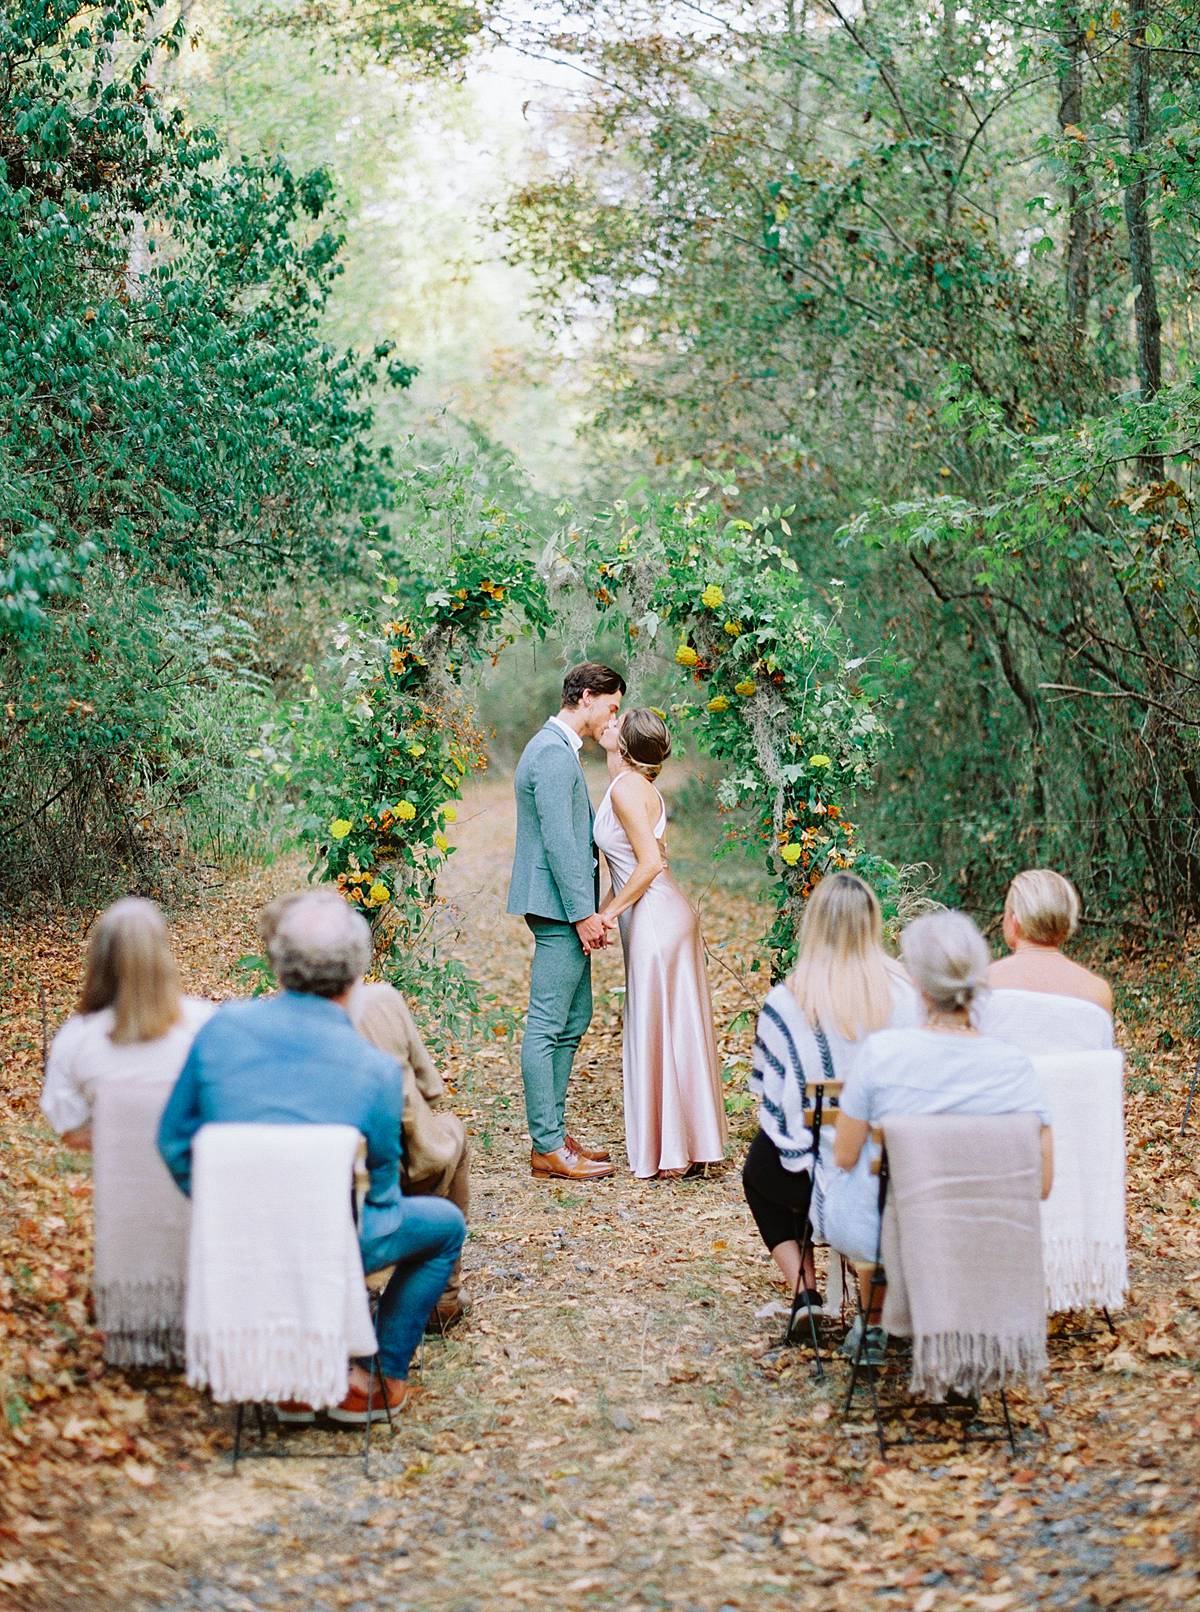 micro wedding ceremony at south carolina wavering place wedding venue groom in green tux bride in blush dress